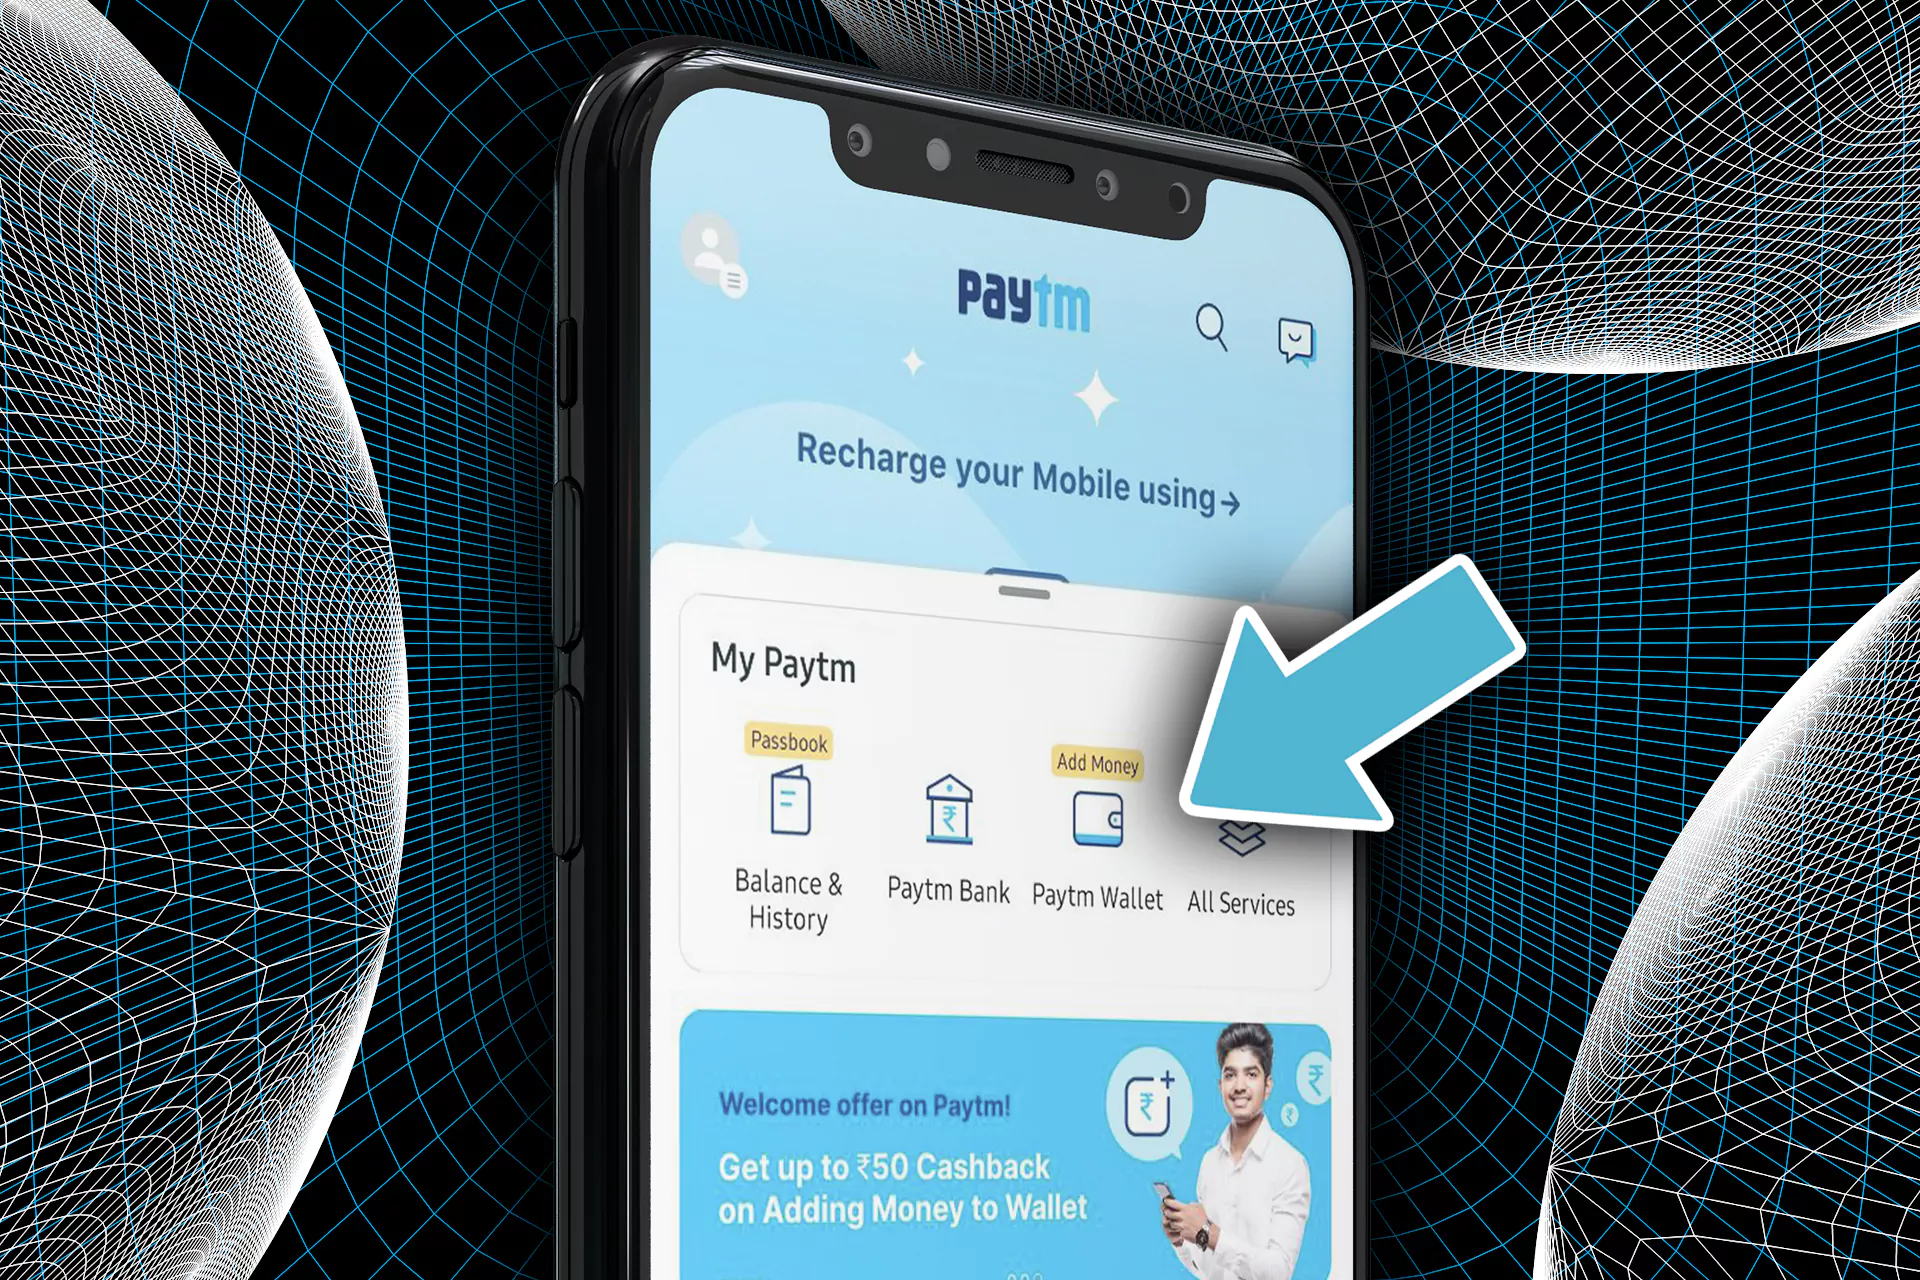 Learn how to top up your PayTM wallet.